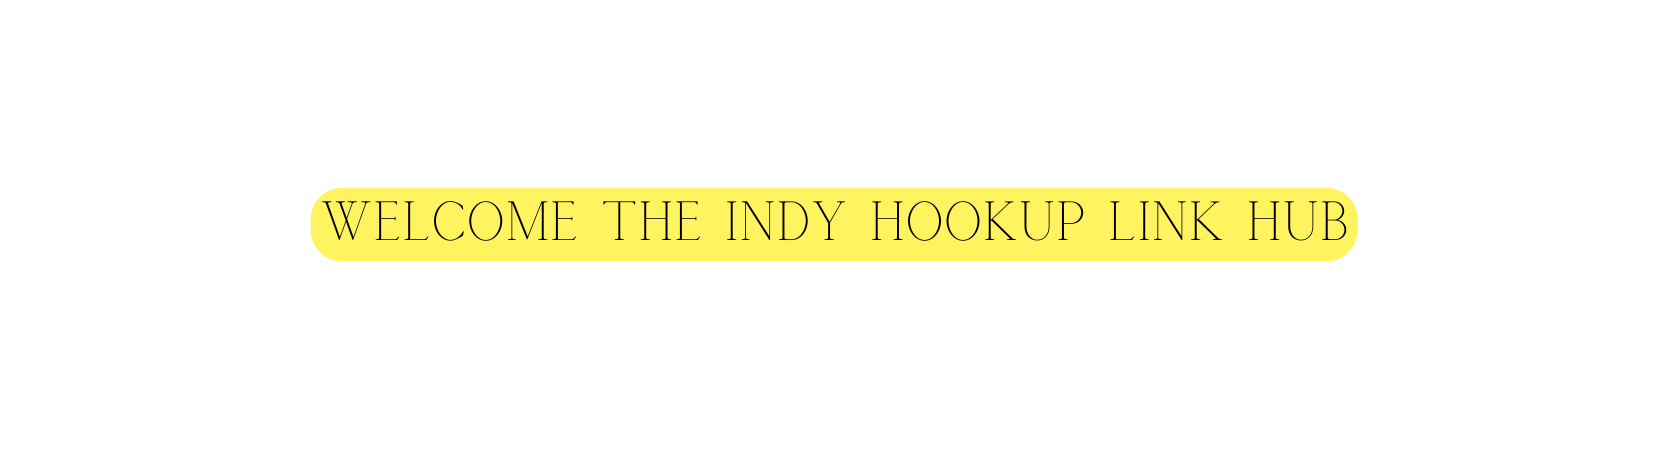 Welcome The Indy Hookup link hub